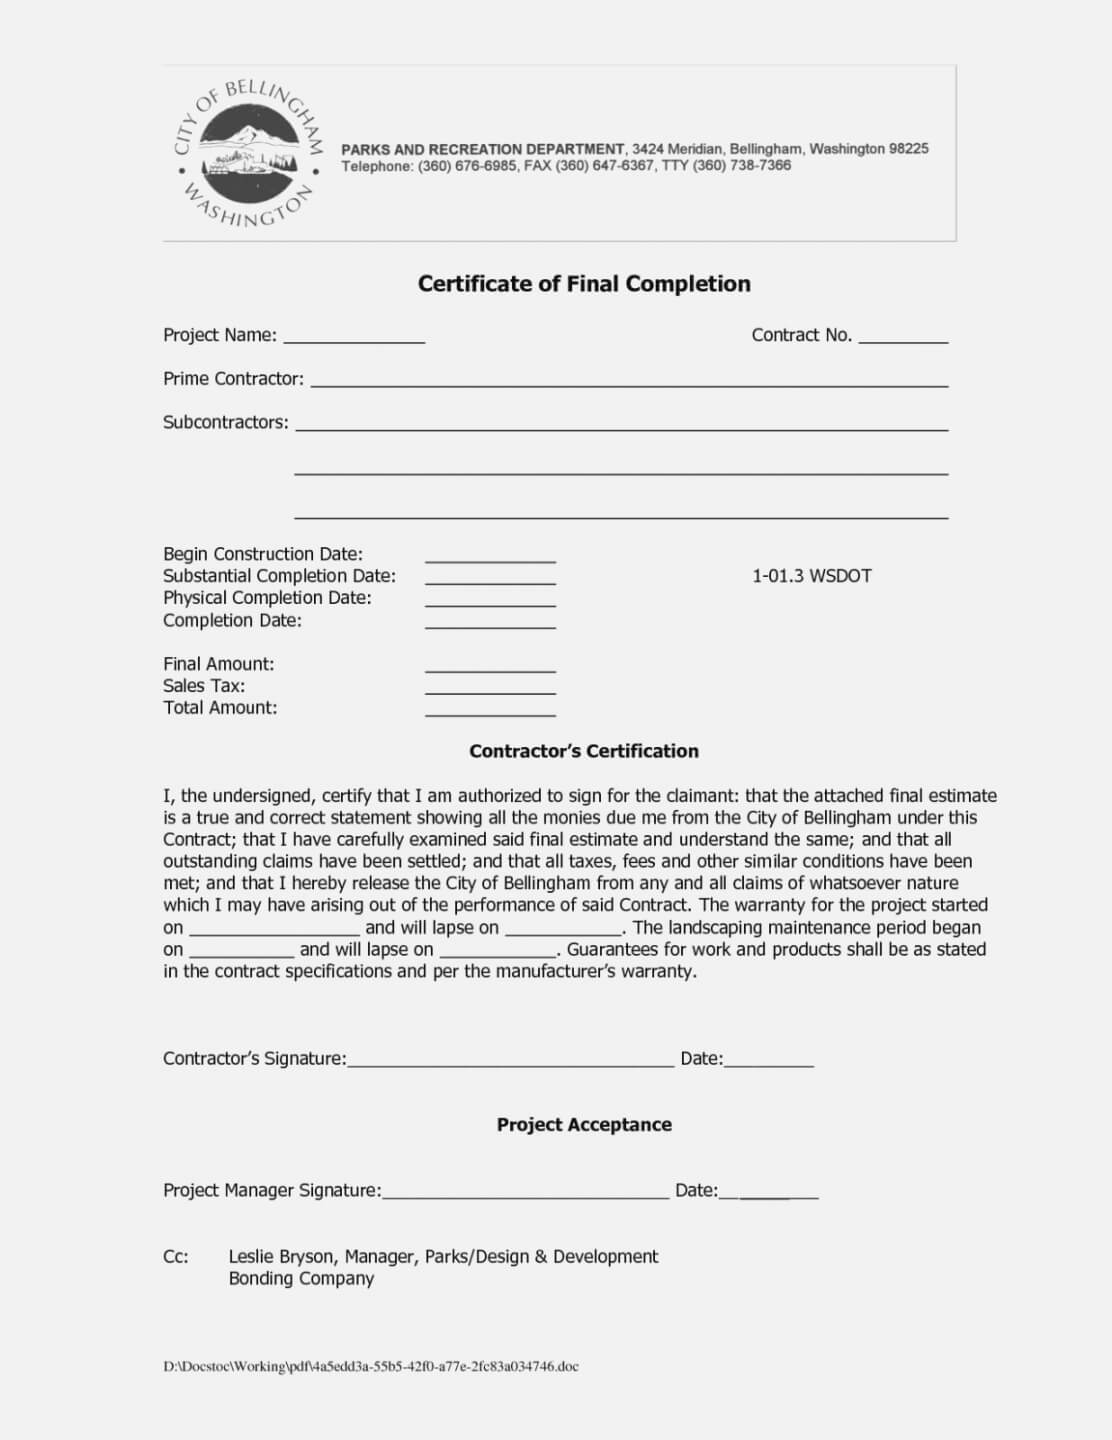 Roofing Certificate Of Completion Template – Zimer.bwong.co Intended For Certificate Of Completion Construction Templates